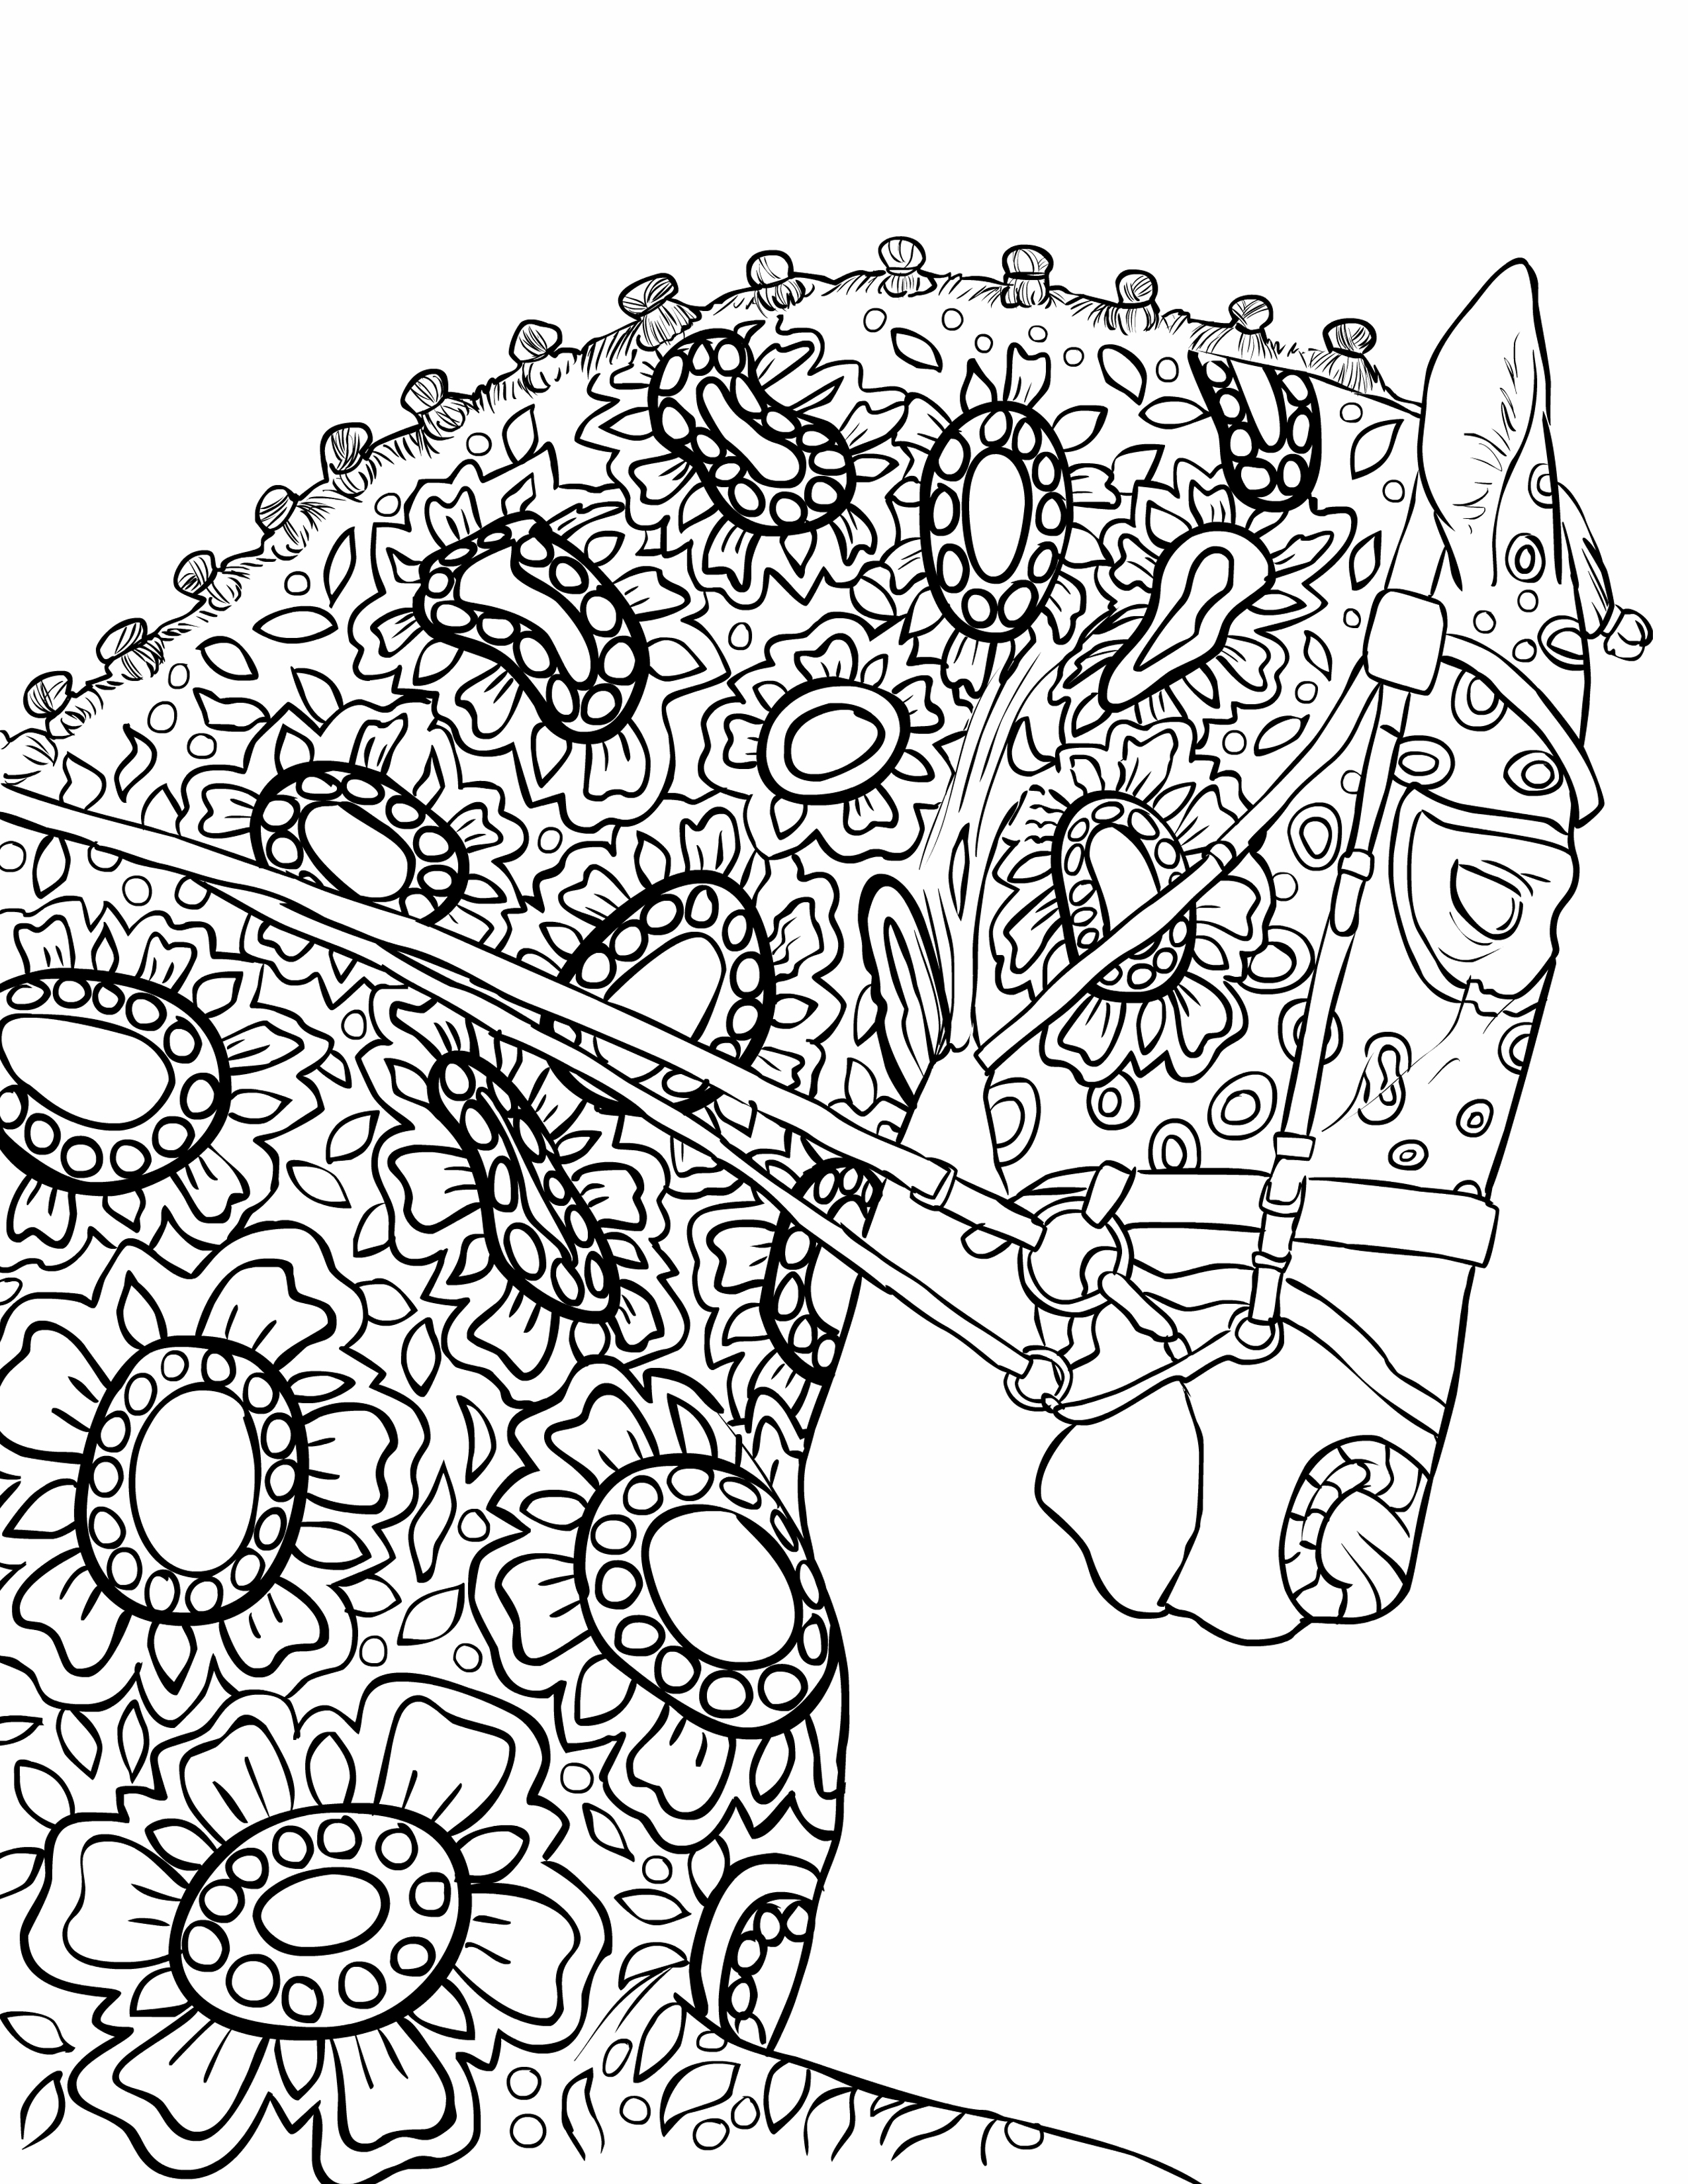 Buy Winter House Printable Adult Coloring Page From Favoreads coloring Book  Pages for Adults and Kids, Coloring Sheets, Colouring Designs Online in  India 